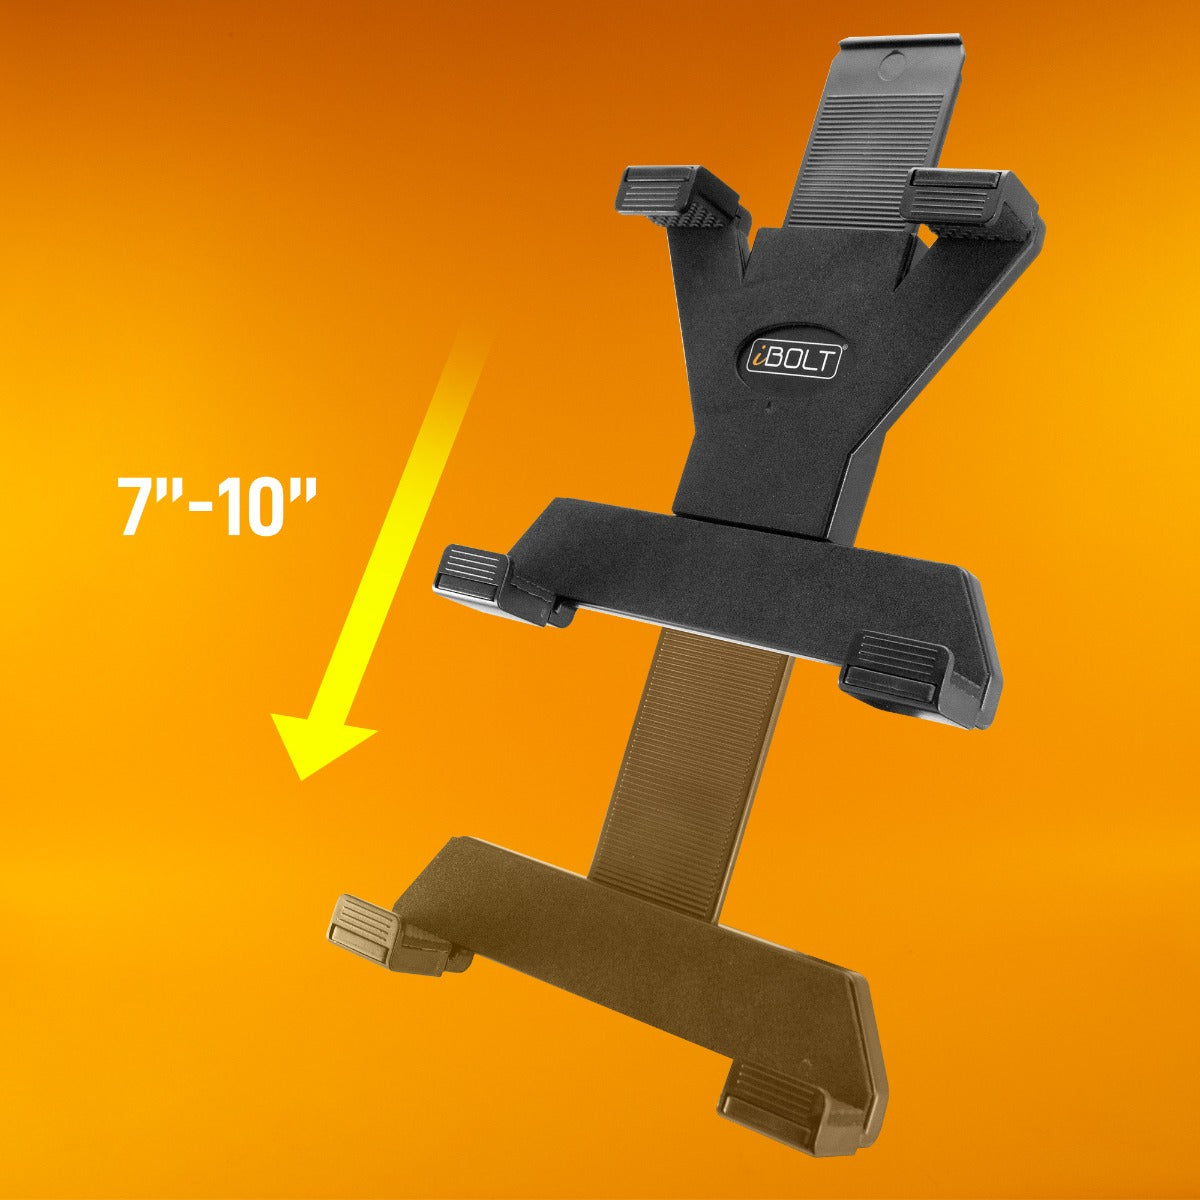 iBOLT TabDock™ IncrediBOLT™ VHB- Heavy Duty Strong VHB Adhesive Mount Compatible with 7”-10” Tablets